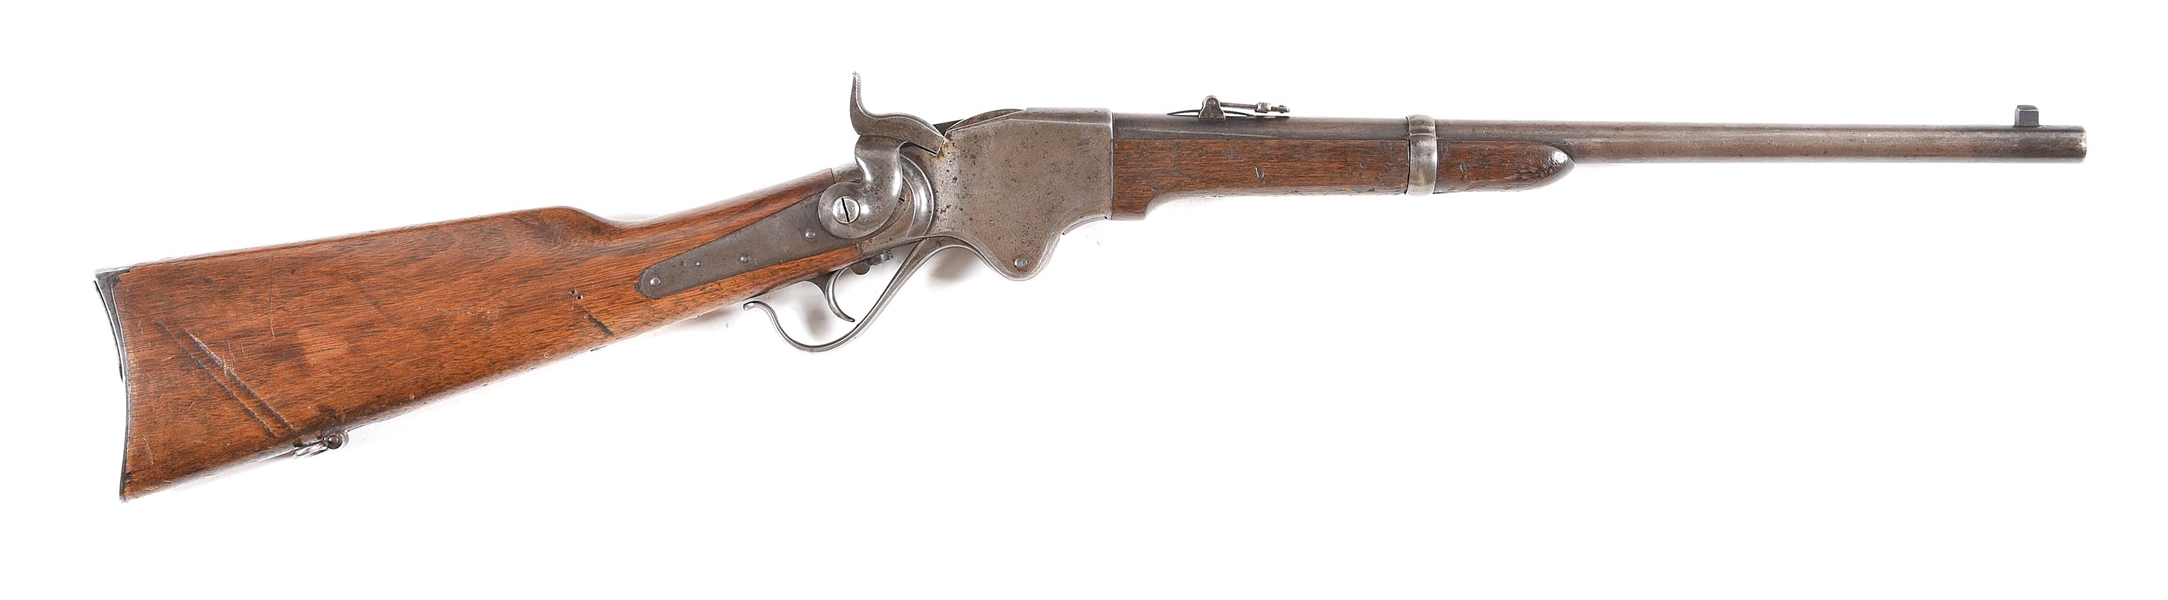 (A) SPENCER 1865 REPEATING RIFLE.